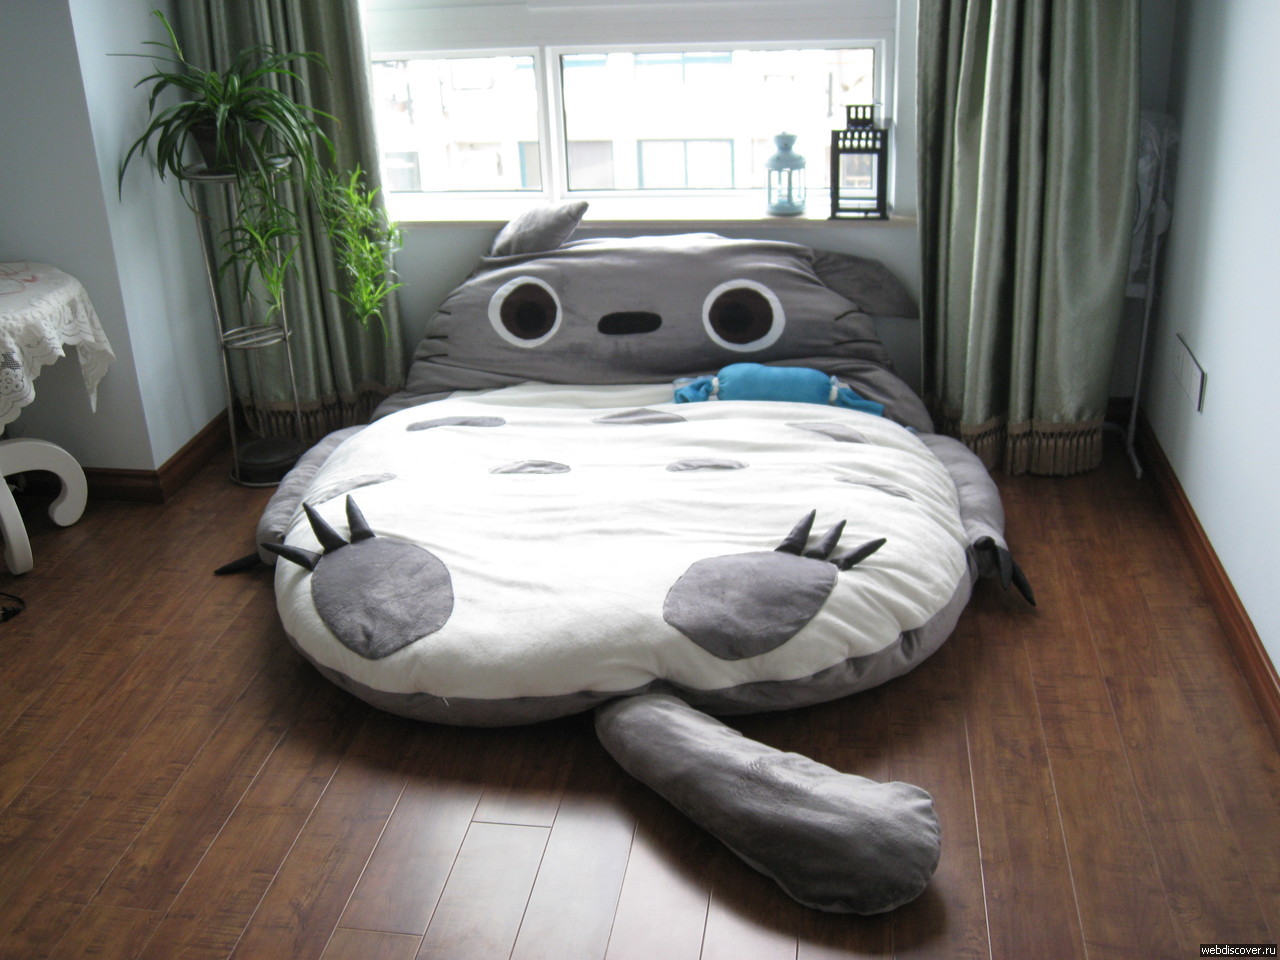 Totoro sleeping bag bed, geeky stuff for your house